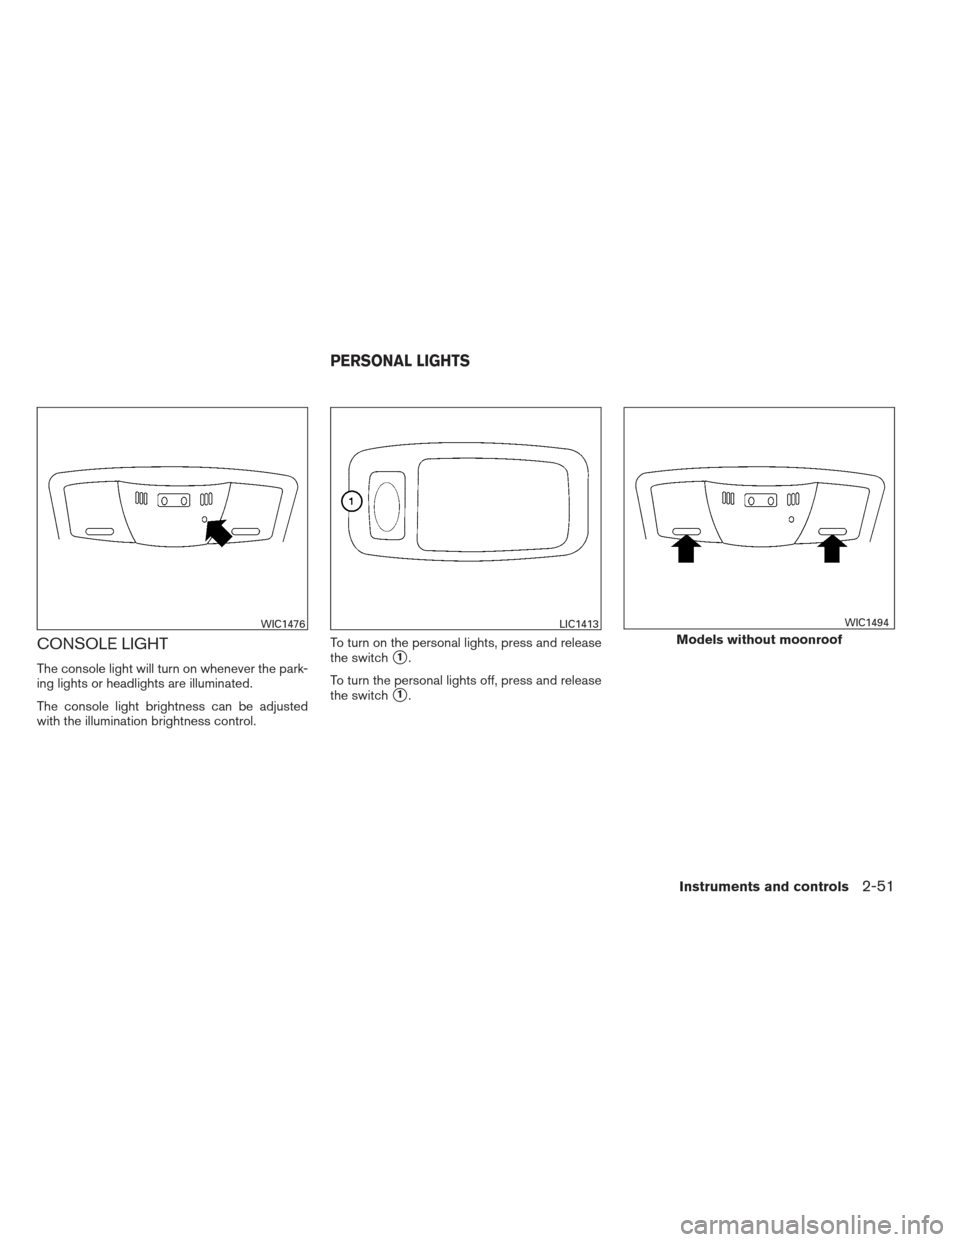 NISSAN MAXIMA 2013 A35 / 7.G Owners Manual CONSOLE LIGHT
The console light will turn on whenever the park-
ing lights or headlights are illuminated.
The console light brightness can be adjusted
with the illumination brightness control.To turn 